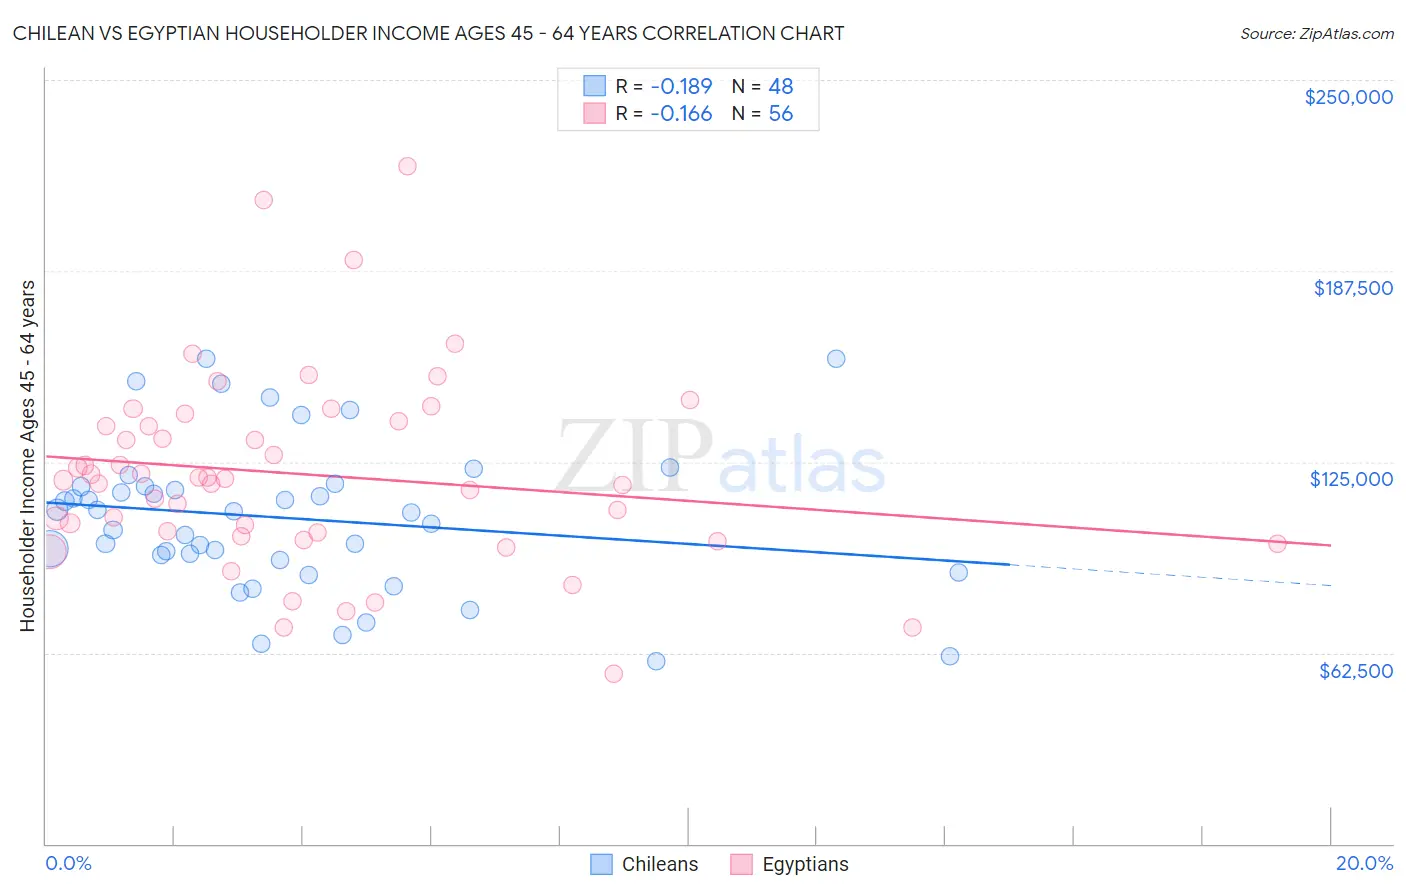 Chilean vs Egyptian Householder Income Ages 45 - 64 years